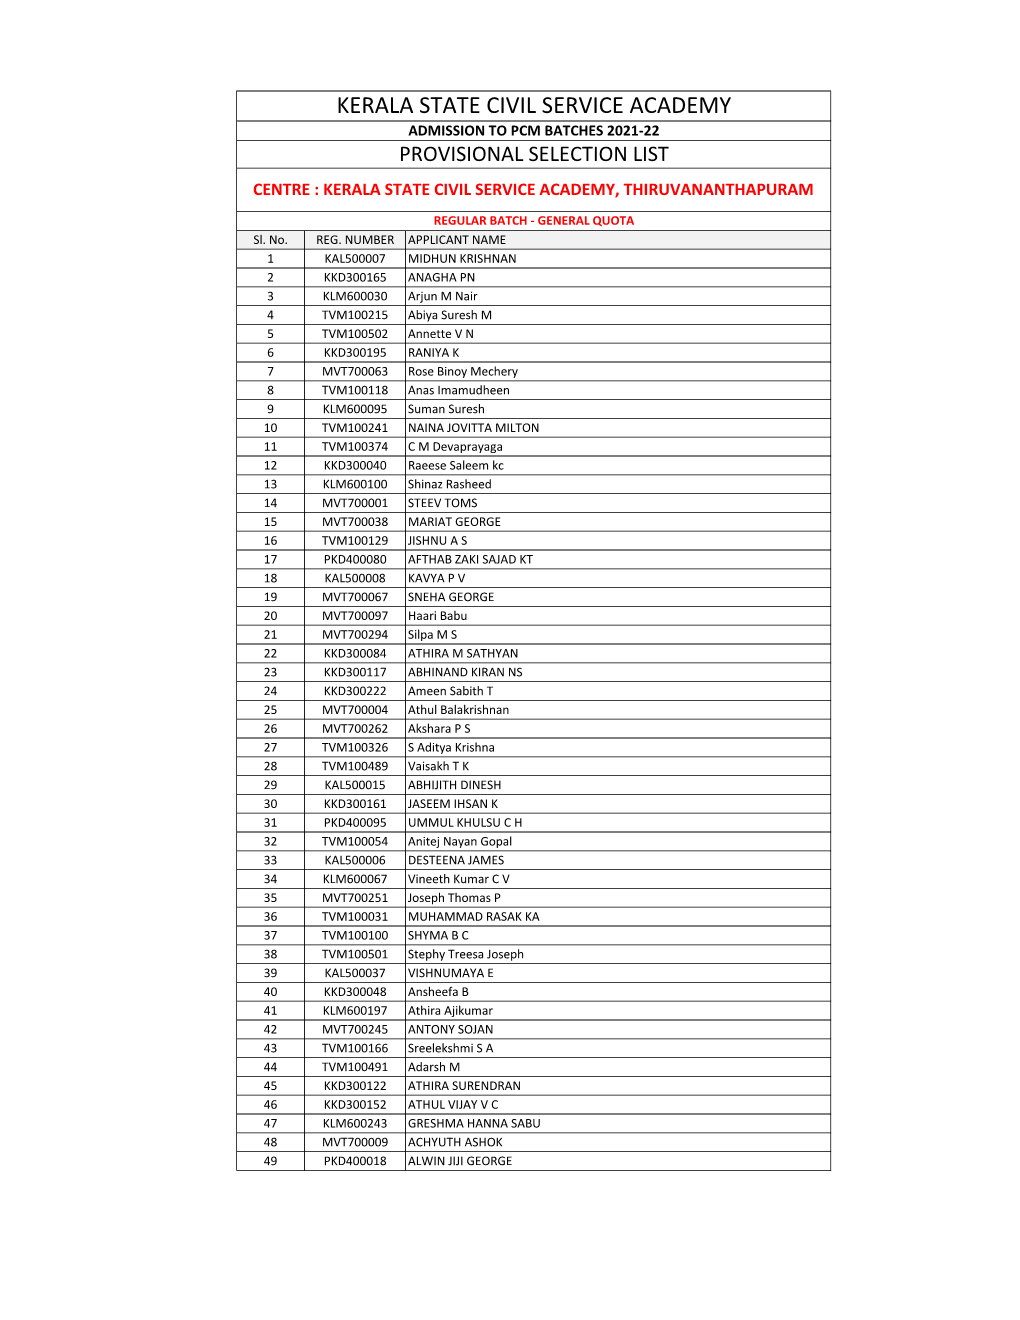 Kerala State Civil Service Academy Admission to Pcm Batches 2021-22 Provisional Selection List Centre : Kerala State Civil Service Academy, Thiruvananthapuram